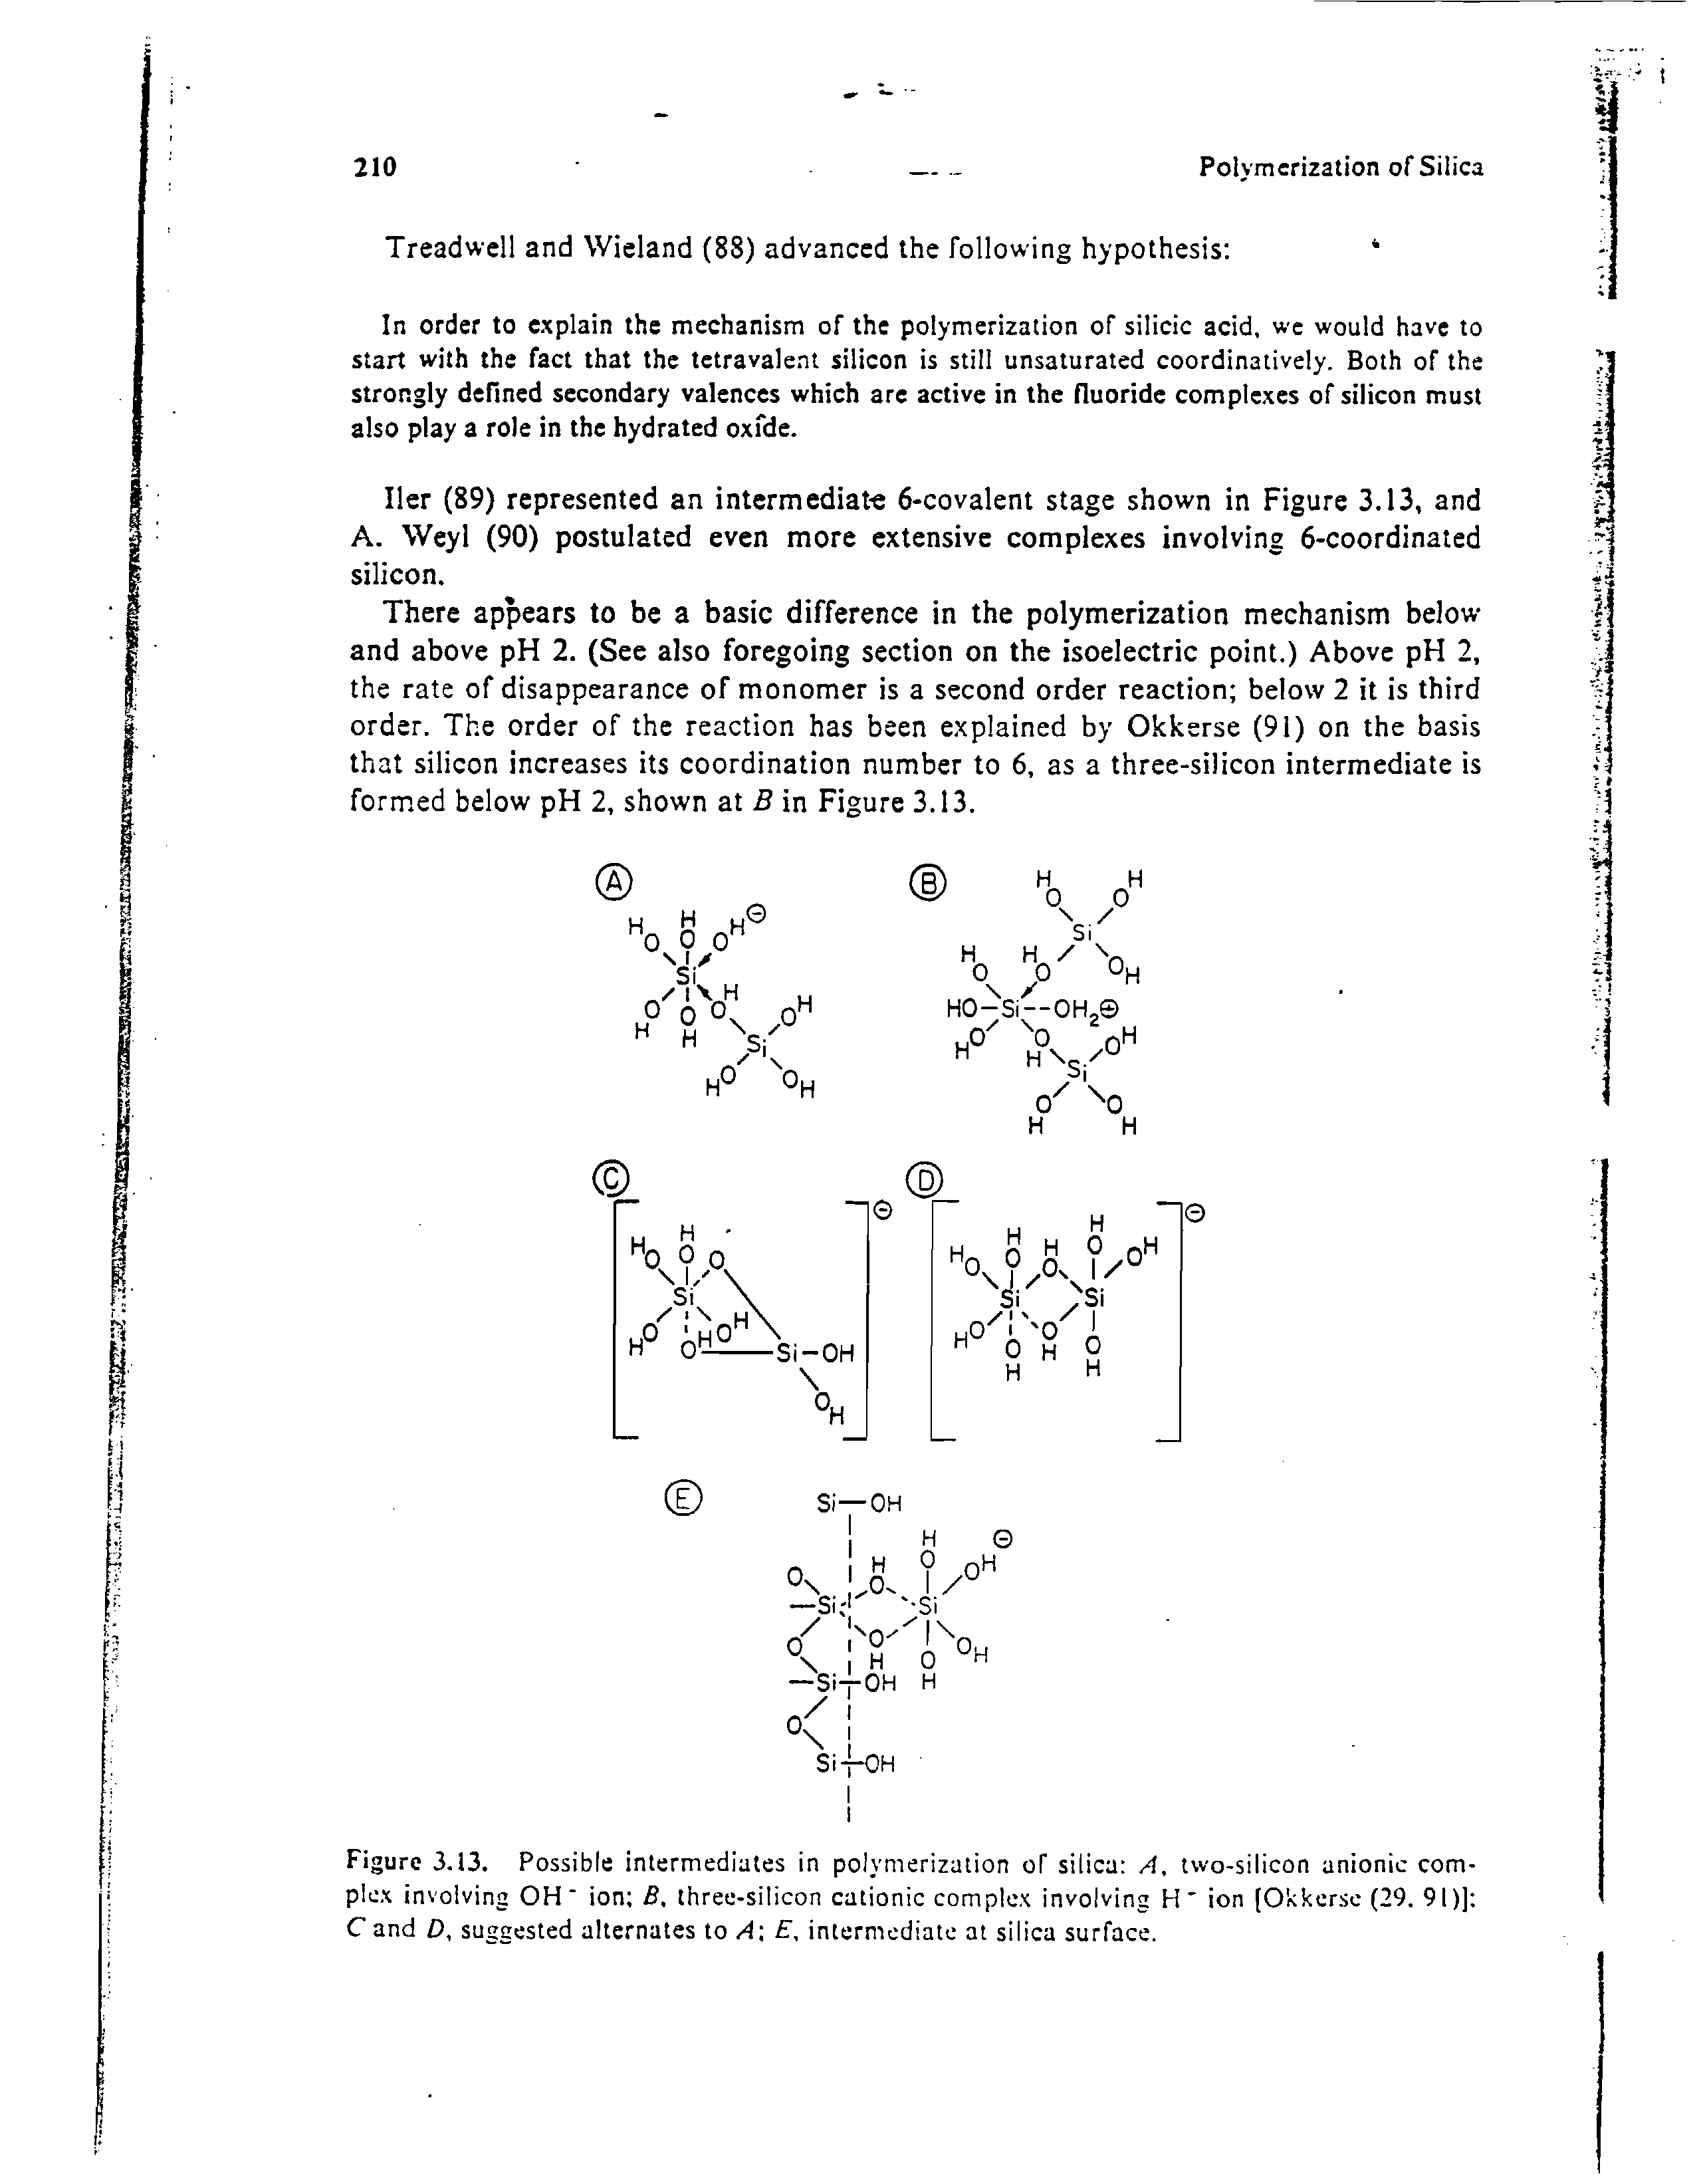 Figure 3.13. Possible intermediates in polymerization of silica A, two-silicon anionic complex involving OH ion B, three-silicon cationic complex involving H ion (Okkerse (29. 91)] C and D, suggested alternates to A E, intermediate at silica surface.